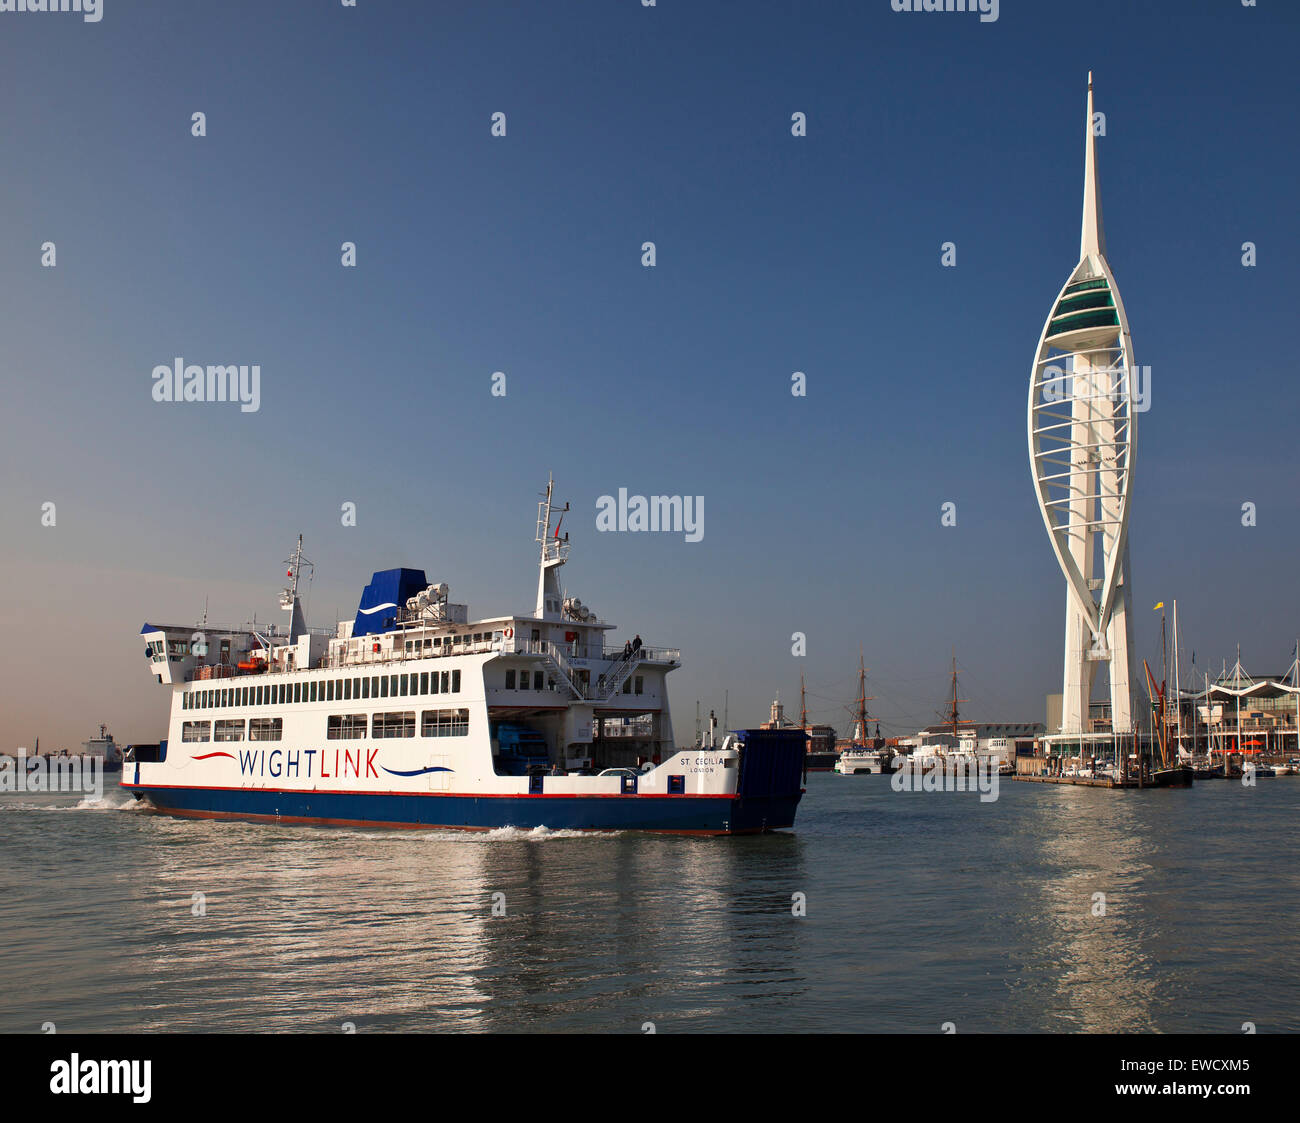 Wightlink Isle of Wight ferry arrivant à Portsmouth. Banque D'Images